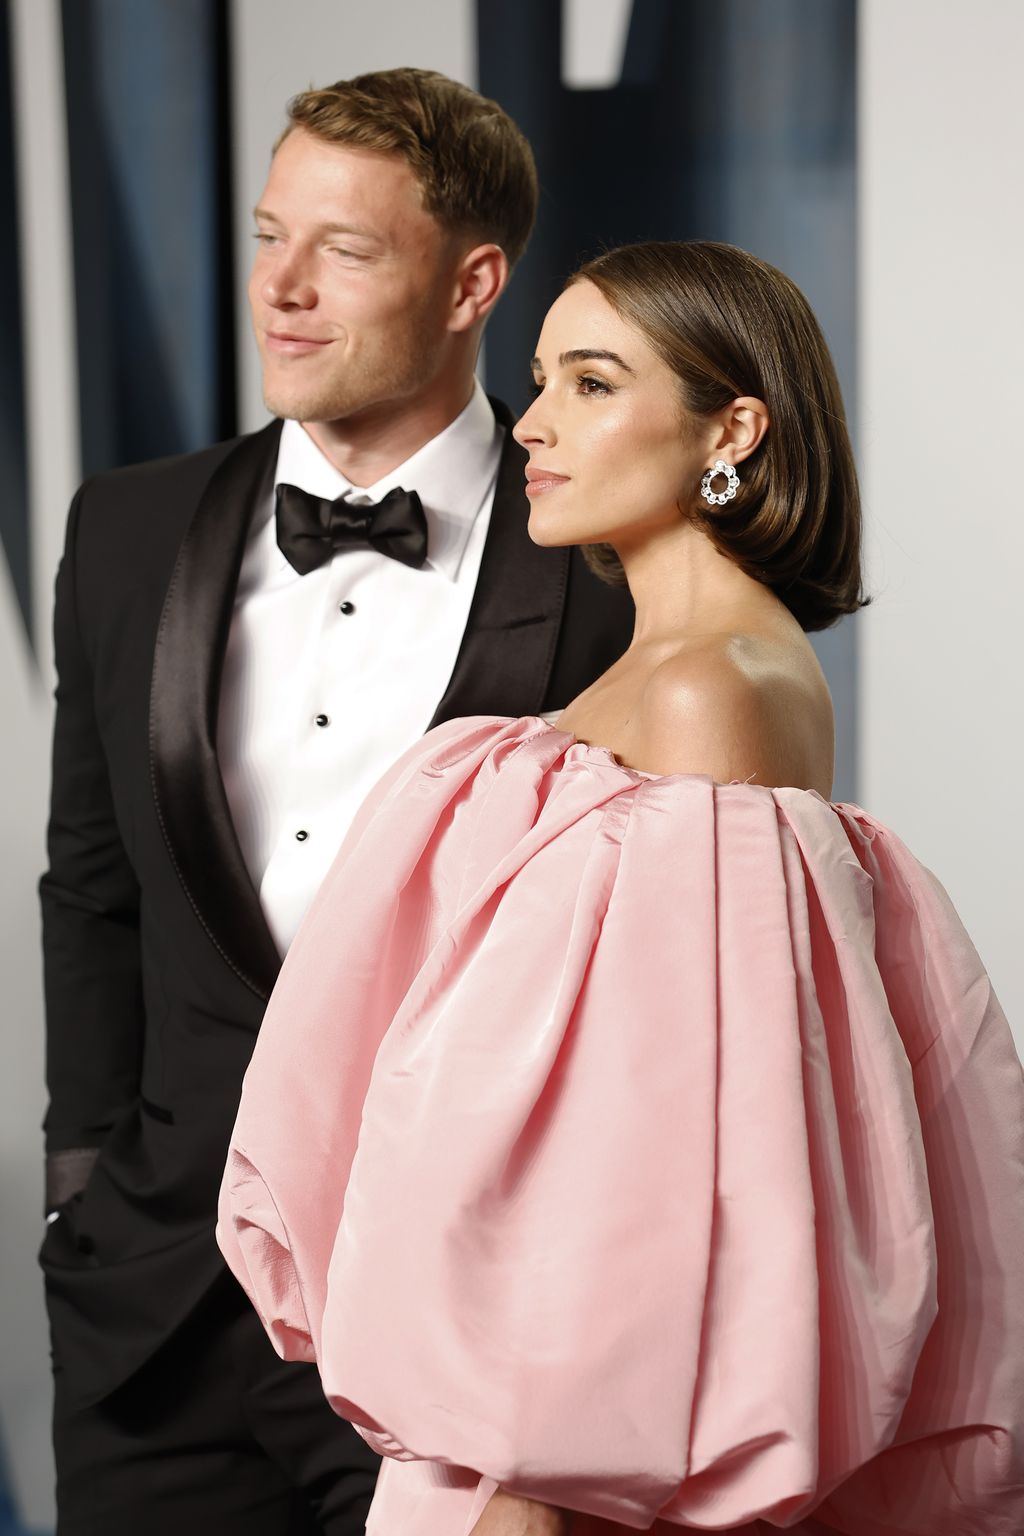 BEVERLY HILLS, CALIFORNIA - MARCH 27: (L-R) Christian McCaffrey and Olivia Culpo attend the 2022 Vanity Fair Oscar Party hosted by Radhika Jones at Wallis Annenberg Center for the Performing Arts on March 27, 2022 in Beverly Hills, California. (Photo by Frazer Harrison/Getty Images)